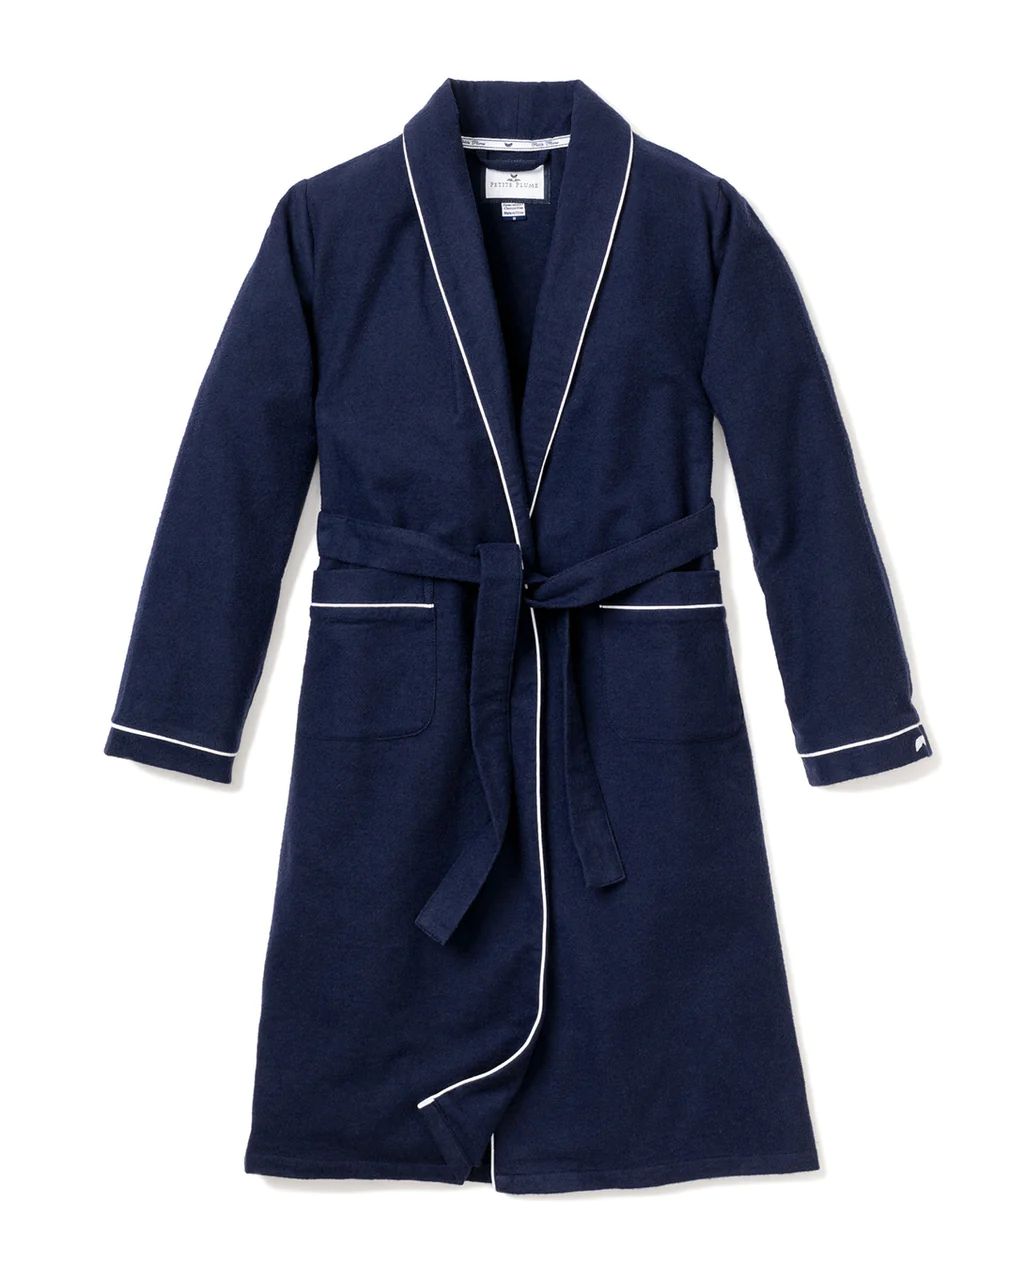 Men's Navy Flannel Robe with White Piping | Petite Plume